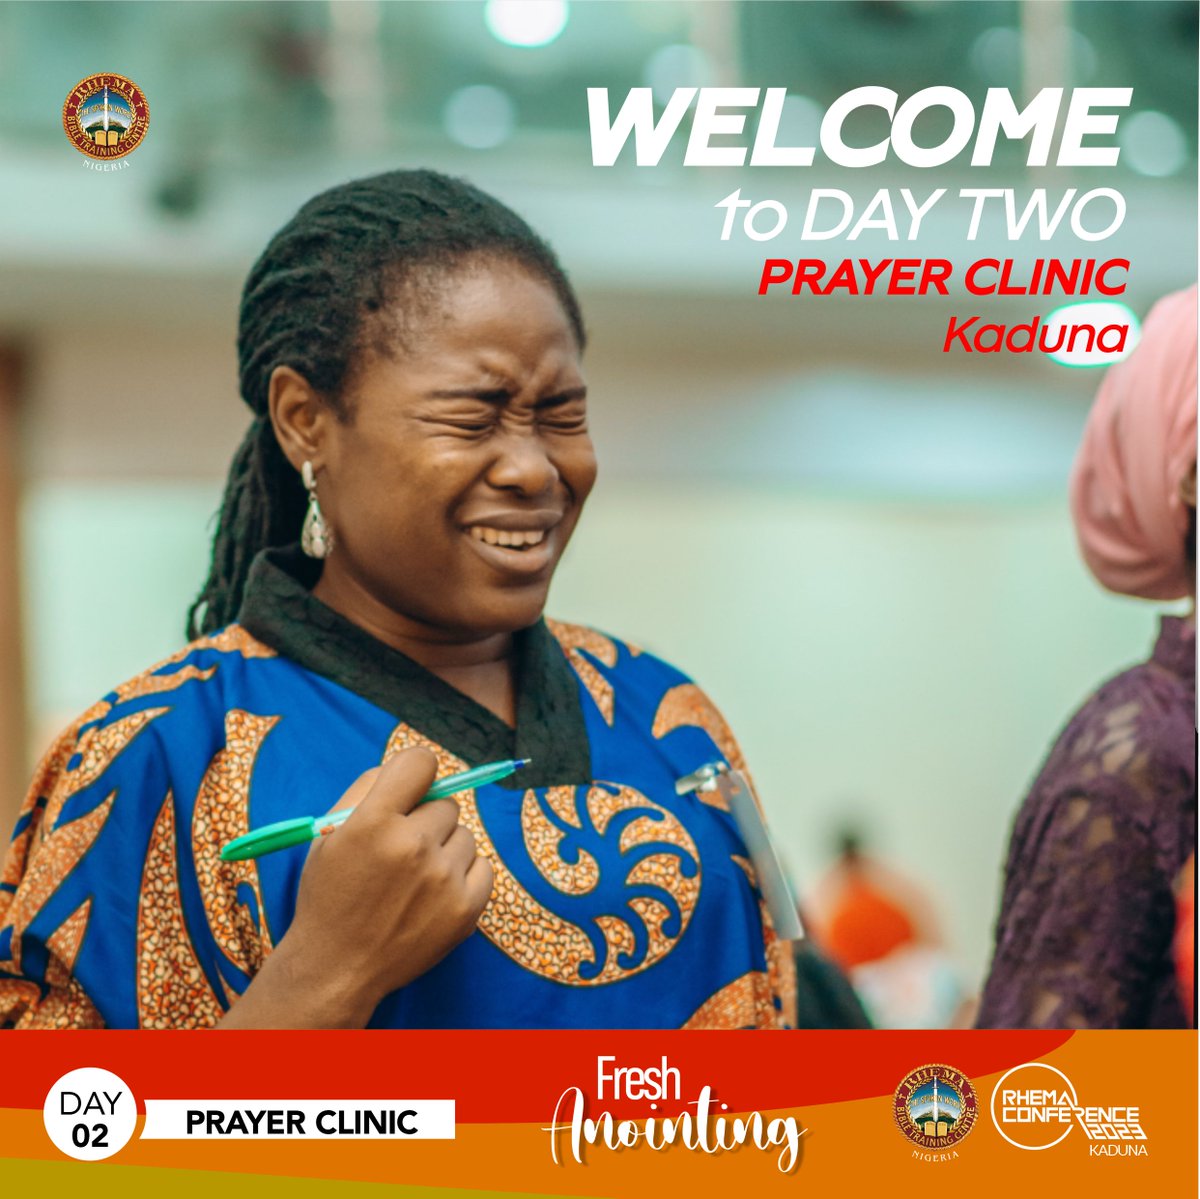 Prayer Clinic with Dr. Akunna Adejuwon  is Live on Facebook, YouTube and Mixlr.
.
.
.
#RhemaConference23 #RC2023 #DayTwo #PrayerClinic